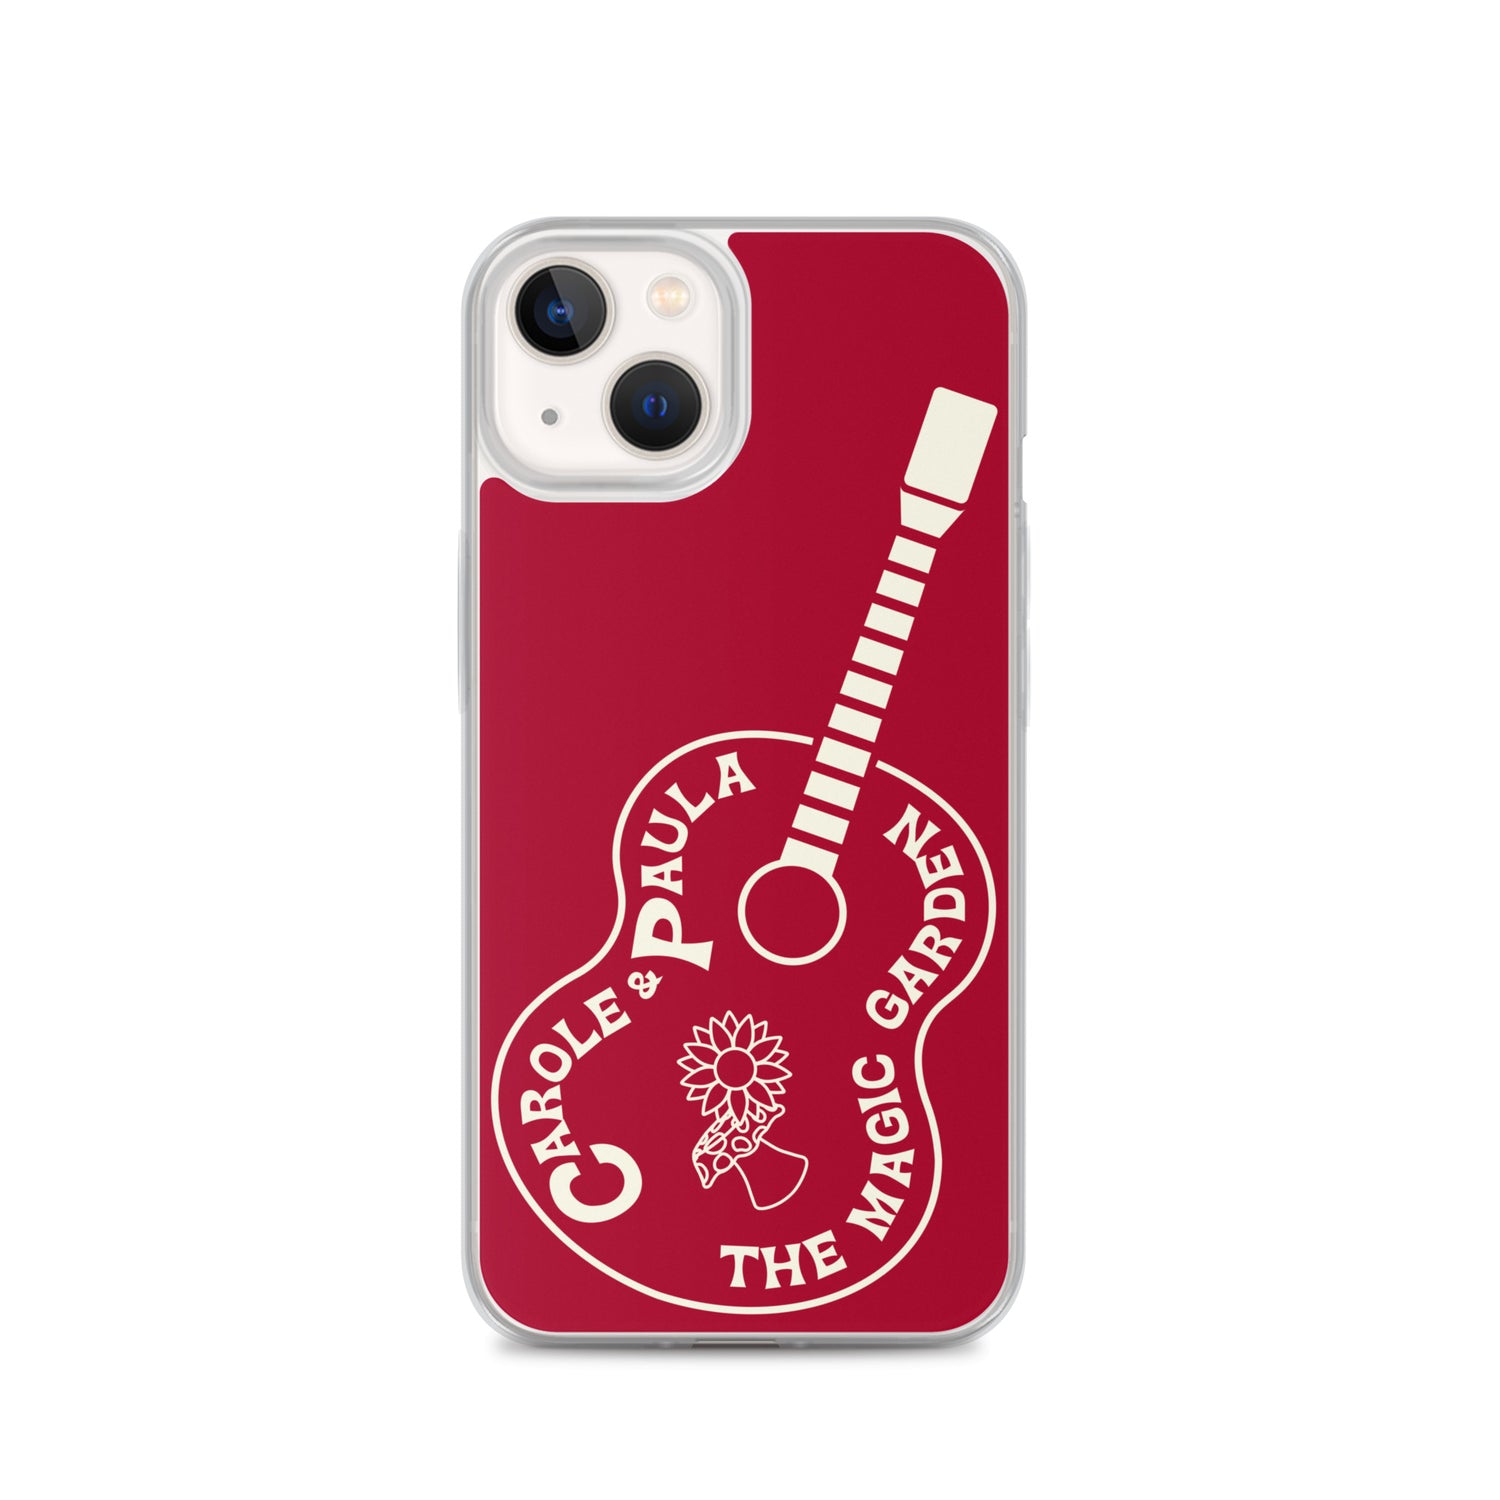 TMG Guitar iPhone Cover, Red